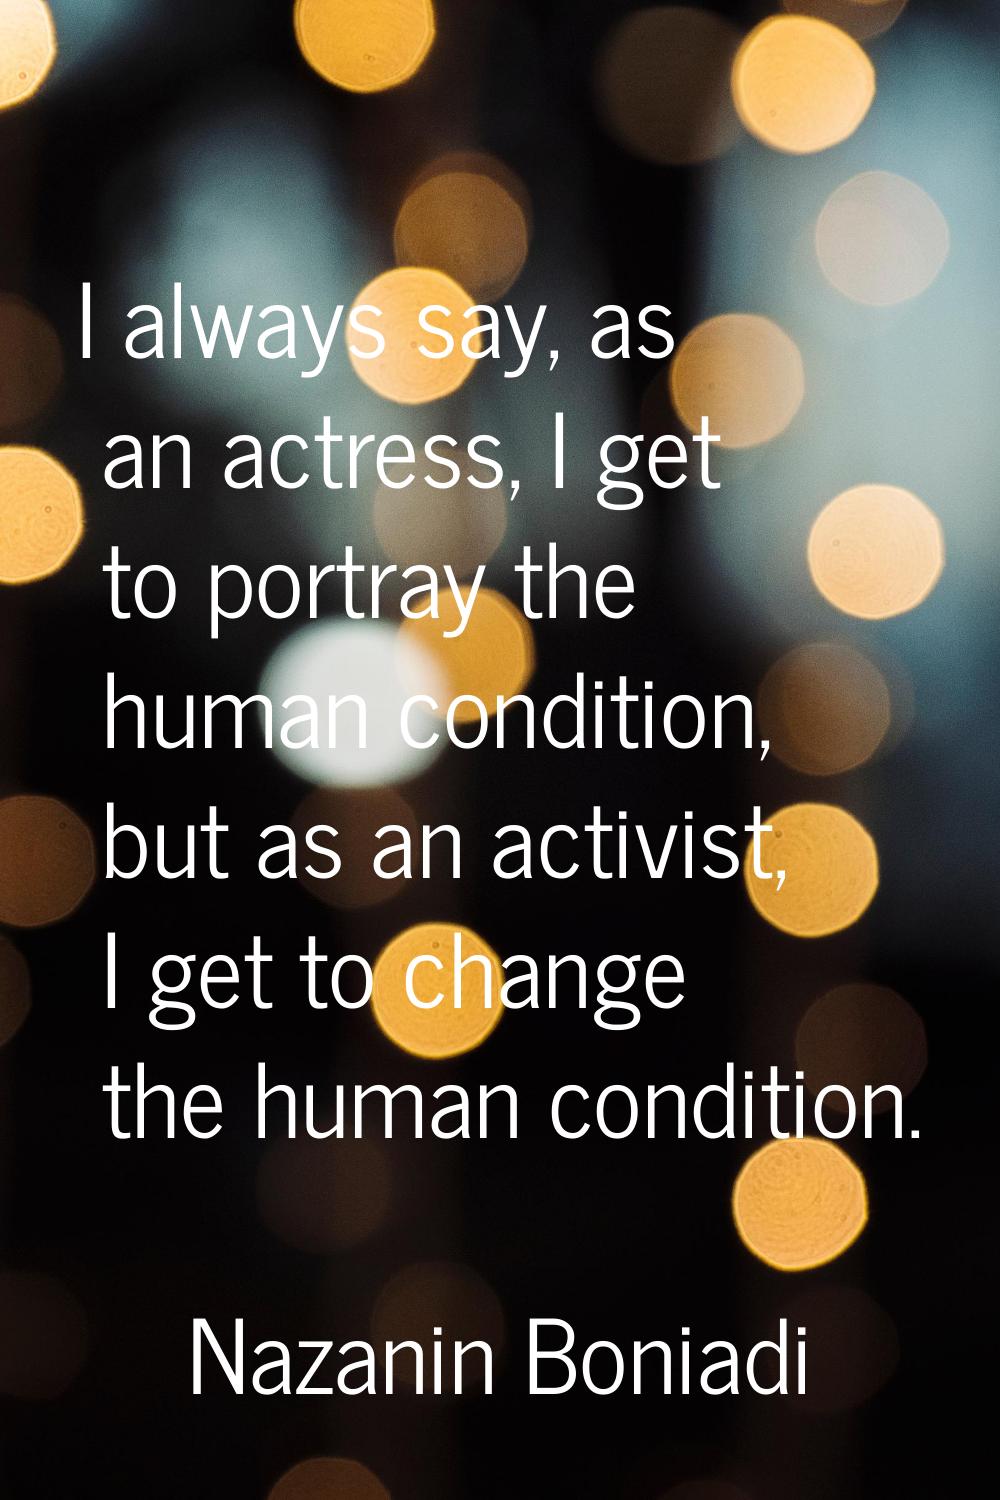 I always say, as an actress, I get to portray the human condition, but as an activist, I get to cha